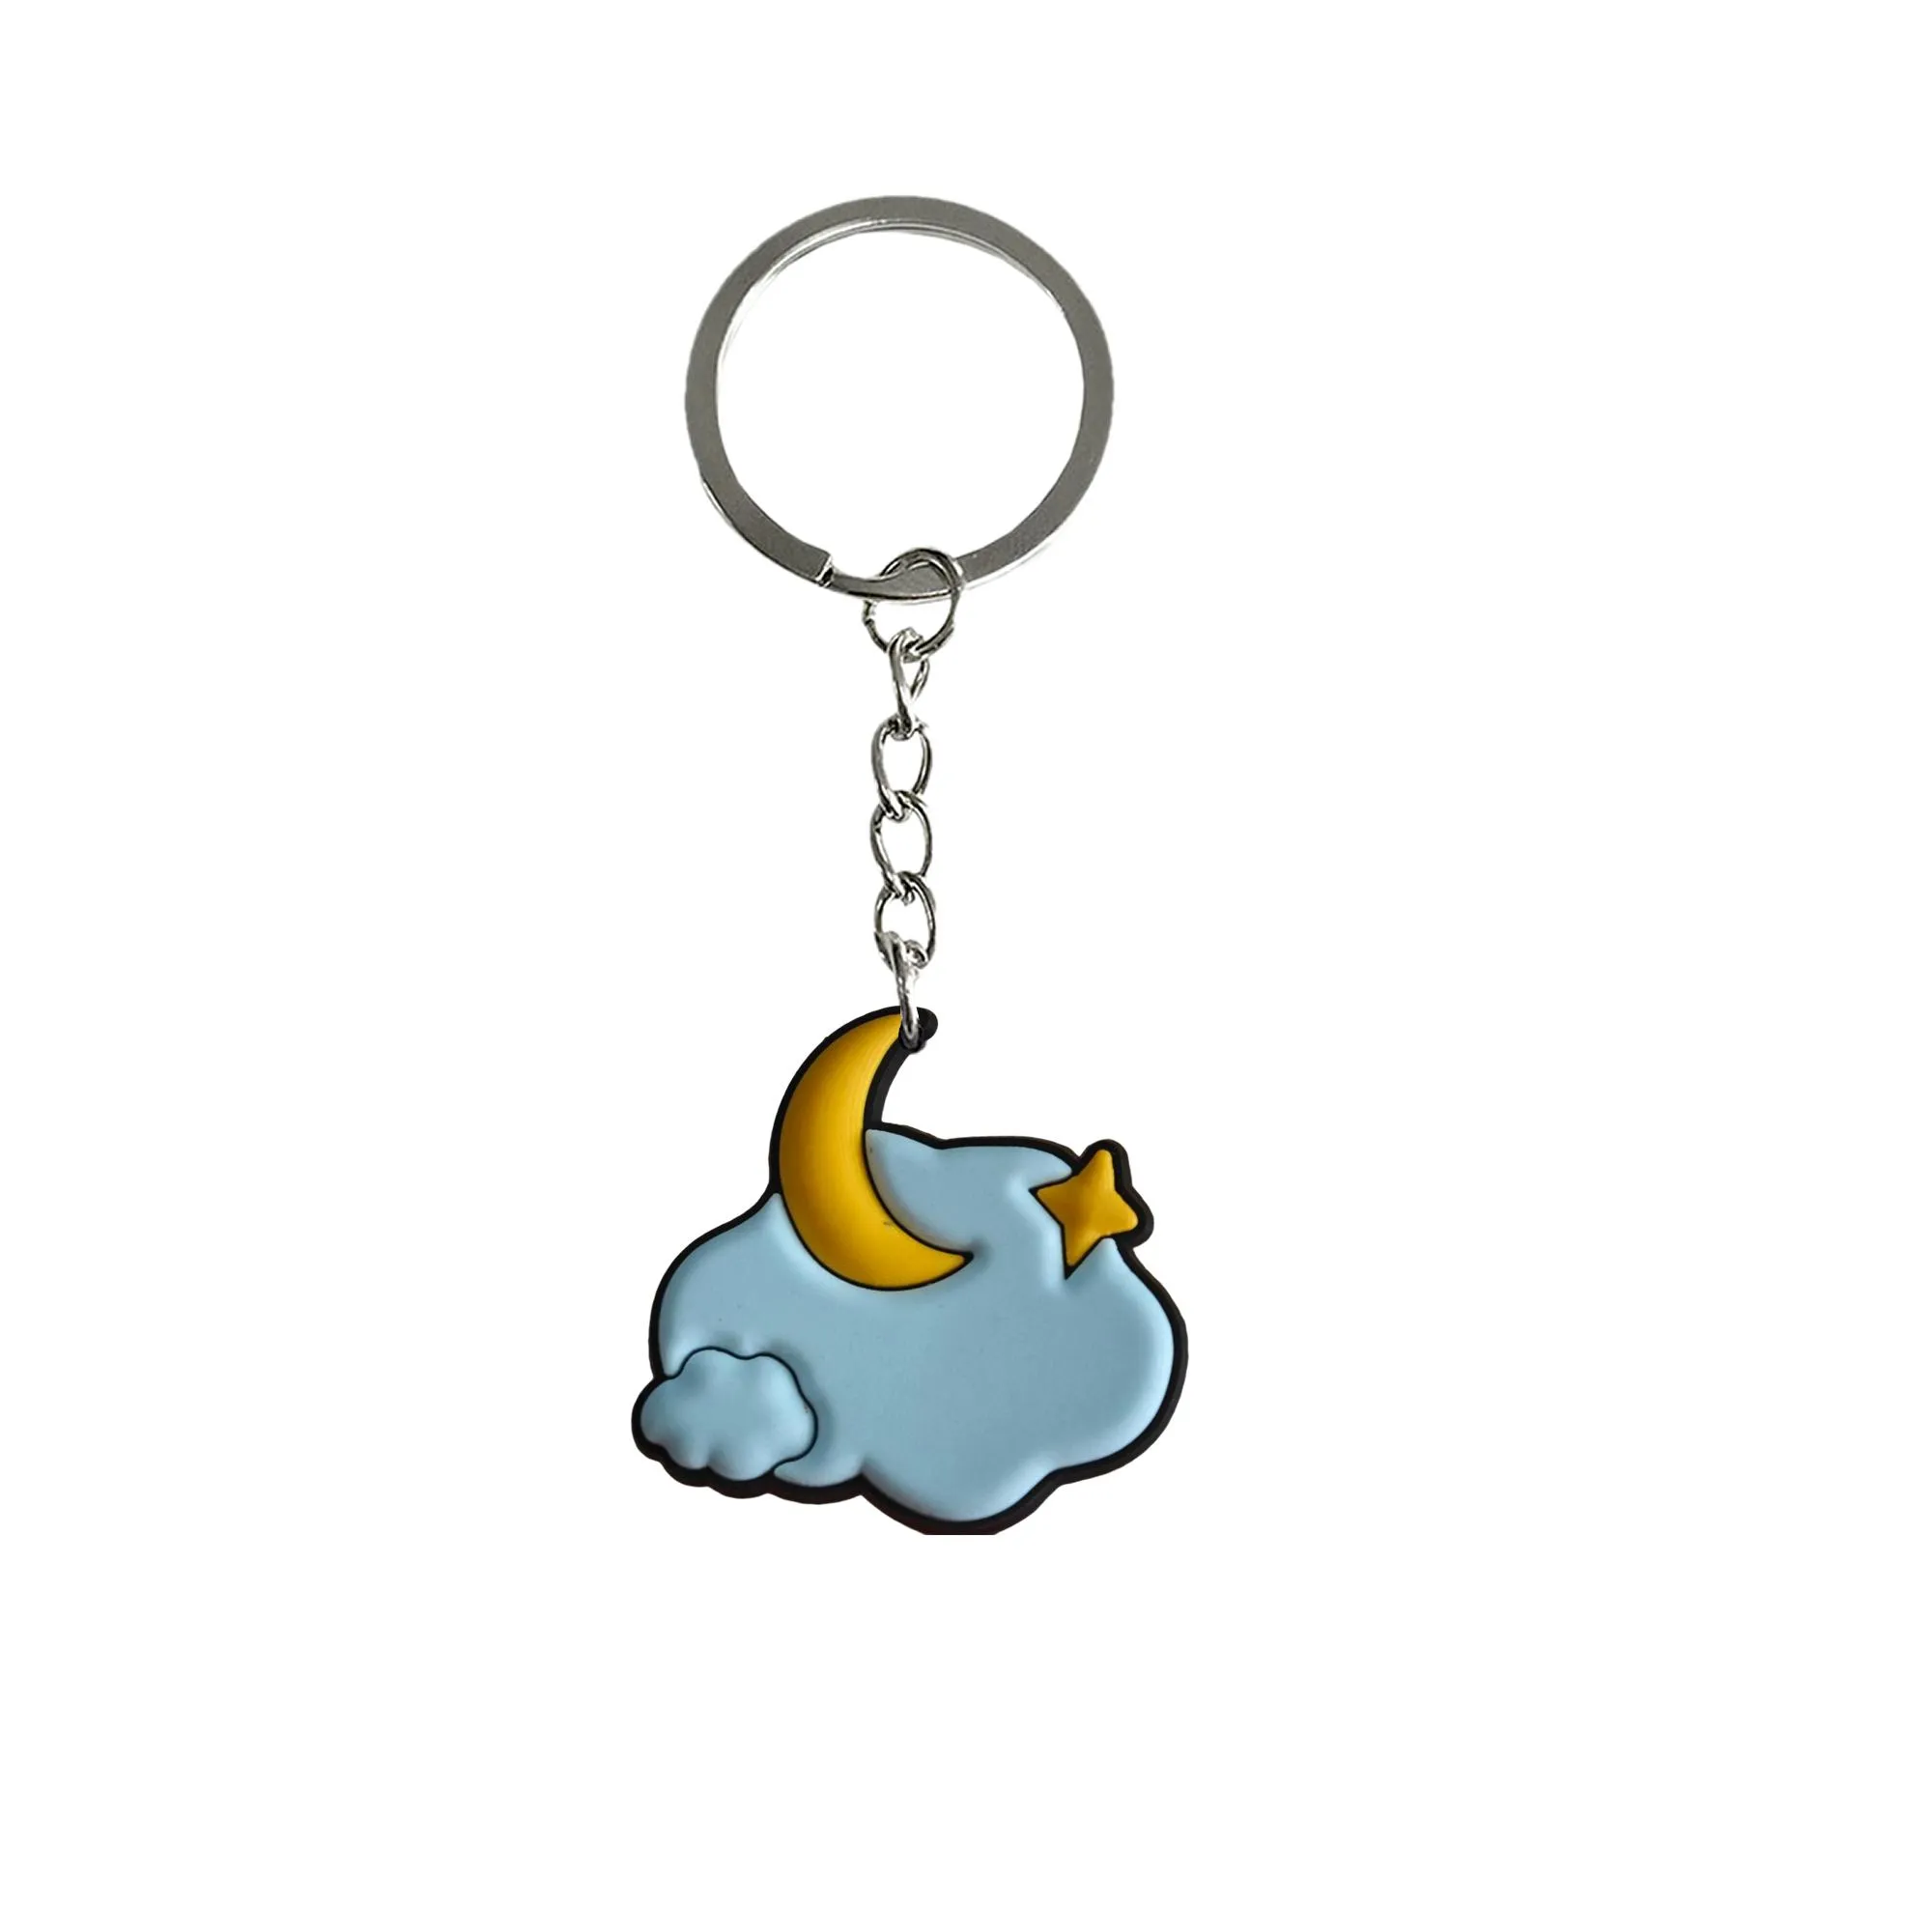 cloud keychain car bag keyring keychains party favors for boys suitable schoolbag backpack key chain kid boy girl gift ring christmas fans